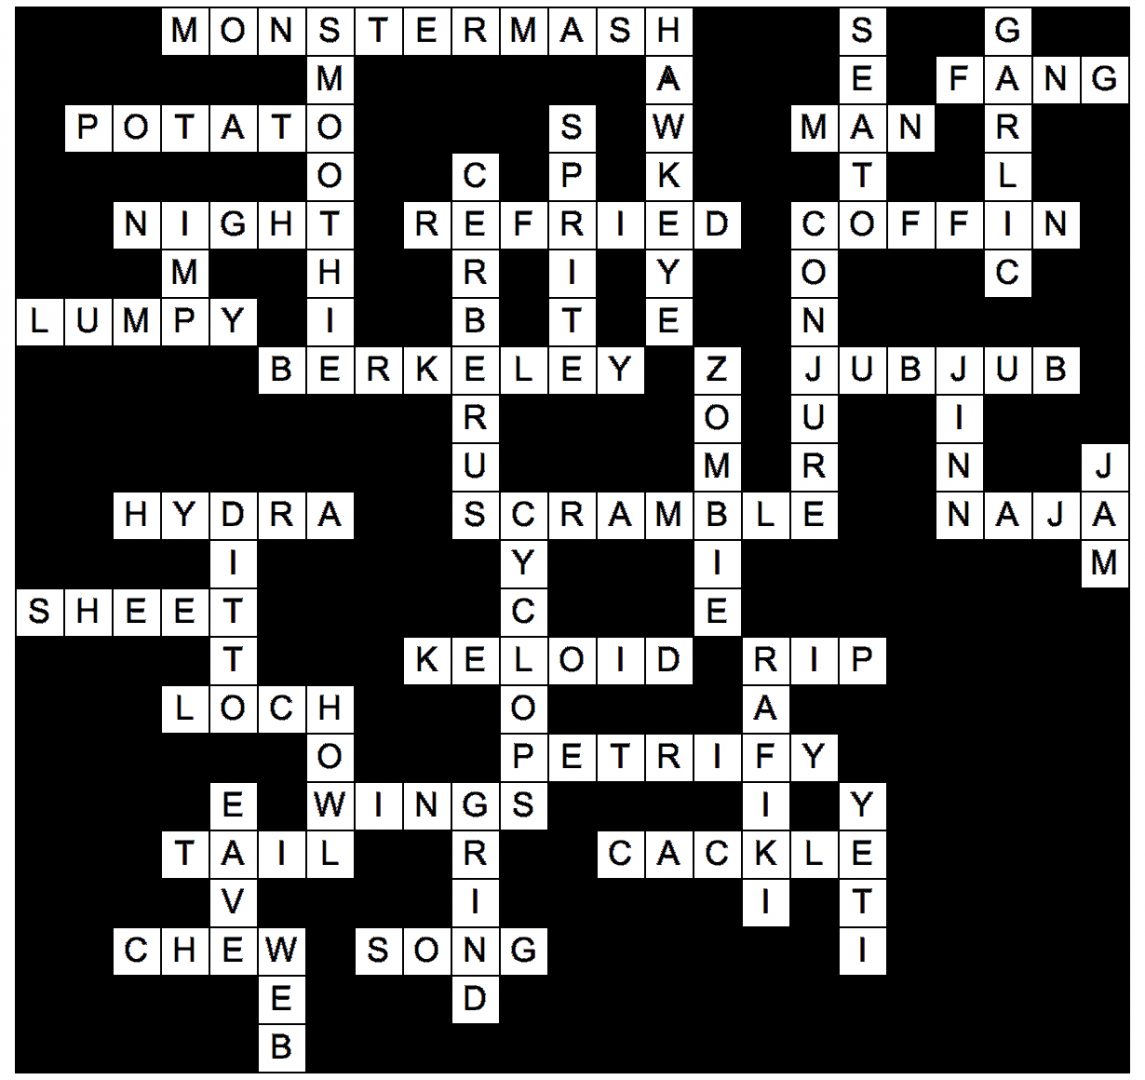 Clarion Crossword Answers: Week 7 – DU Clarion